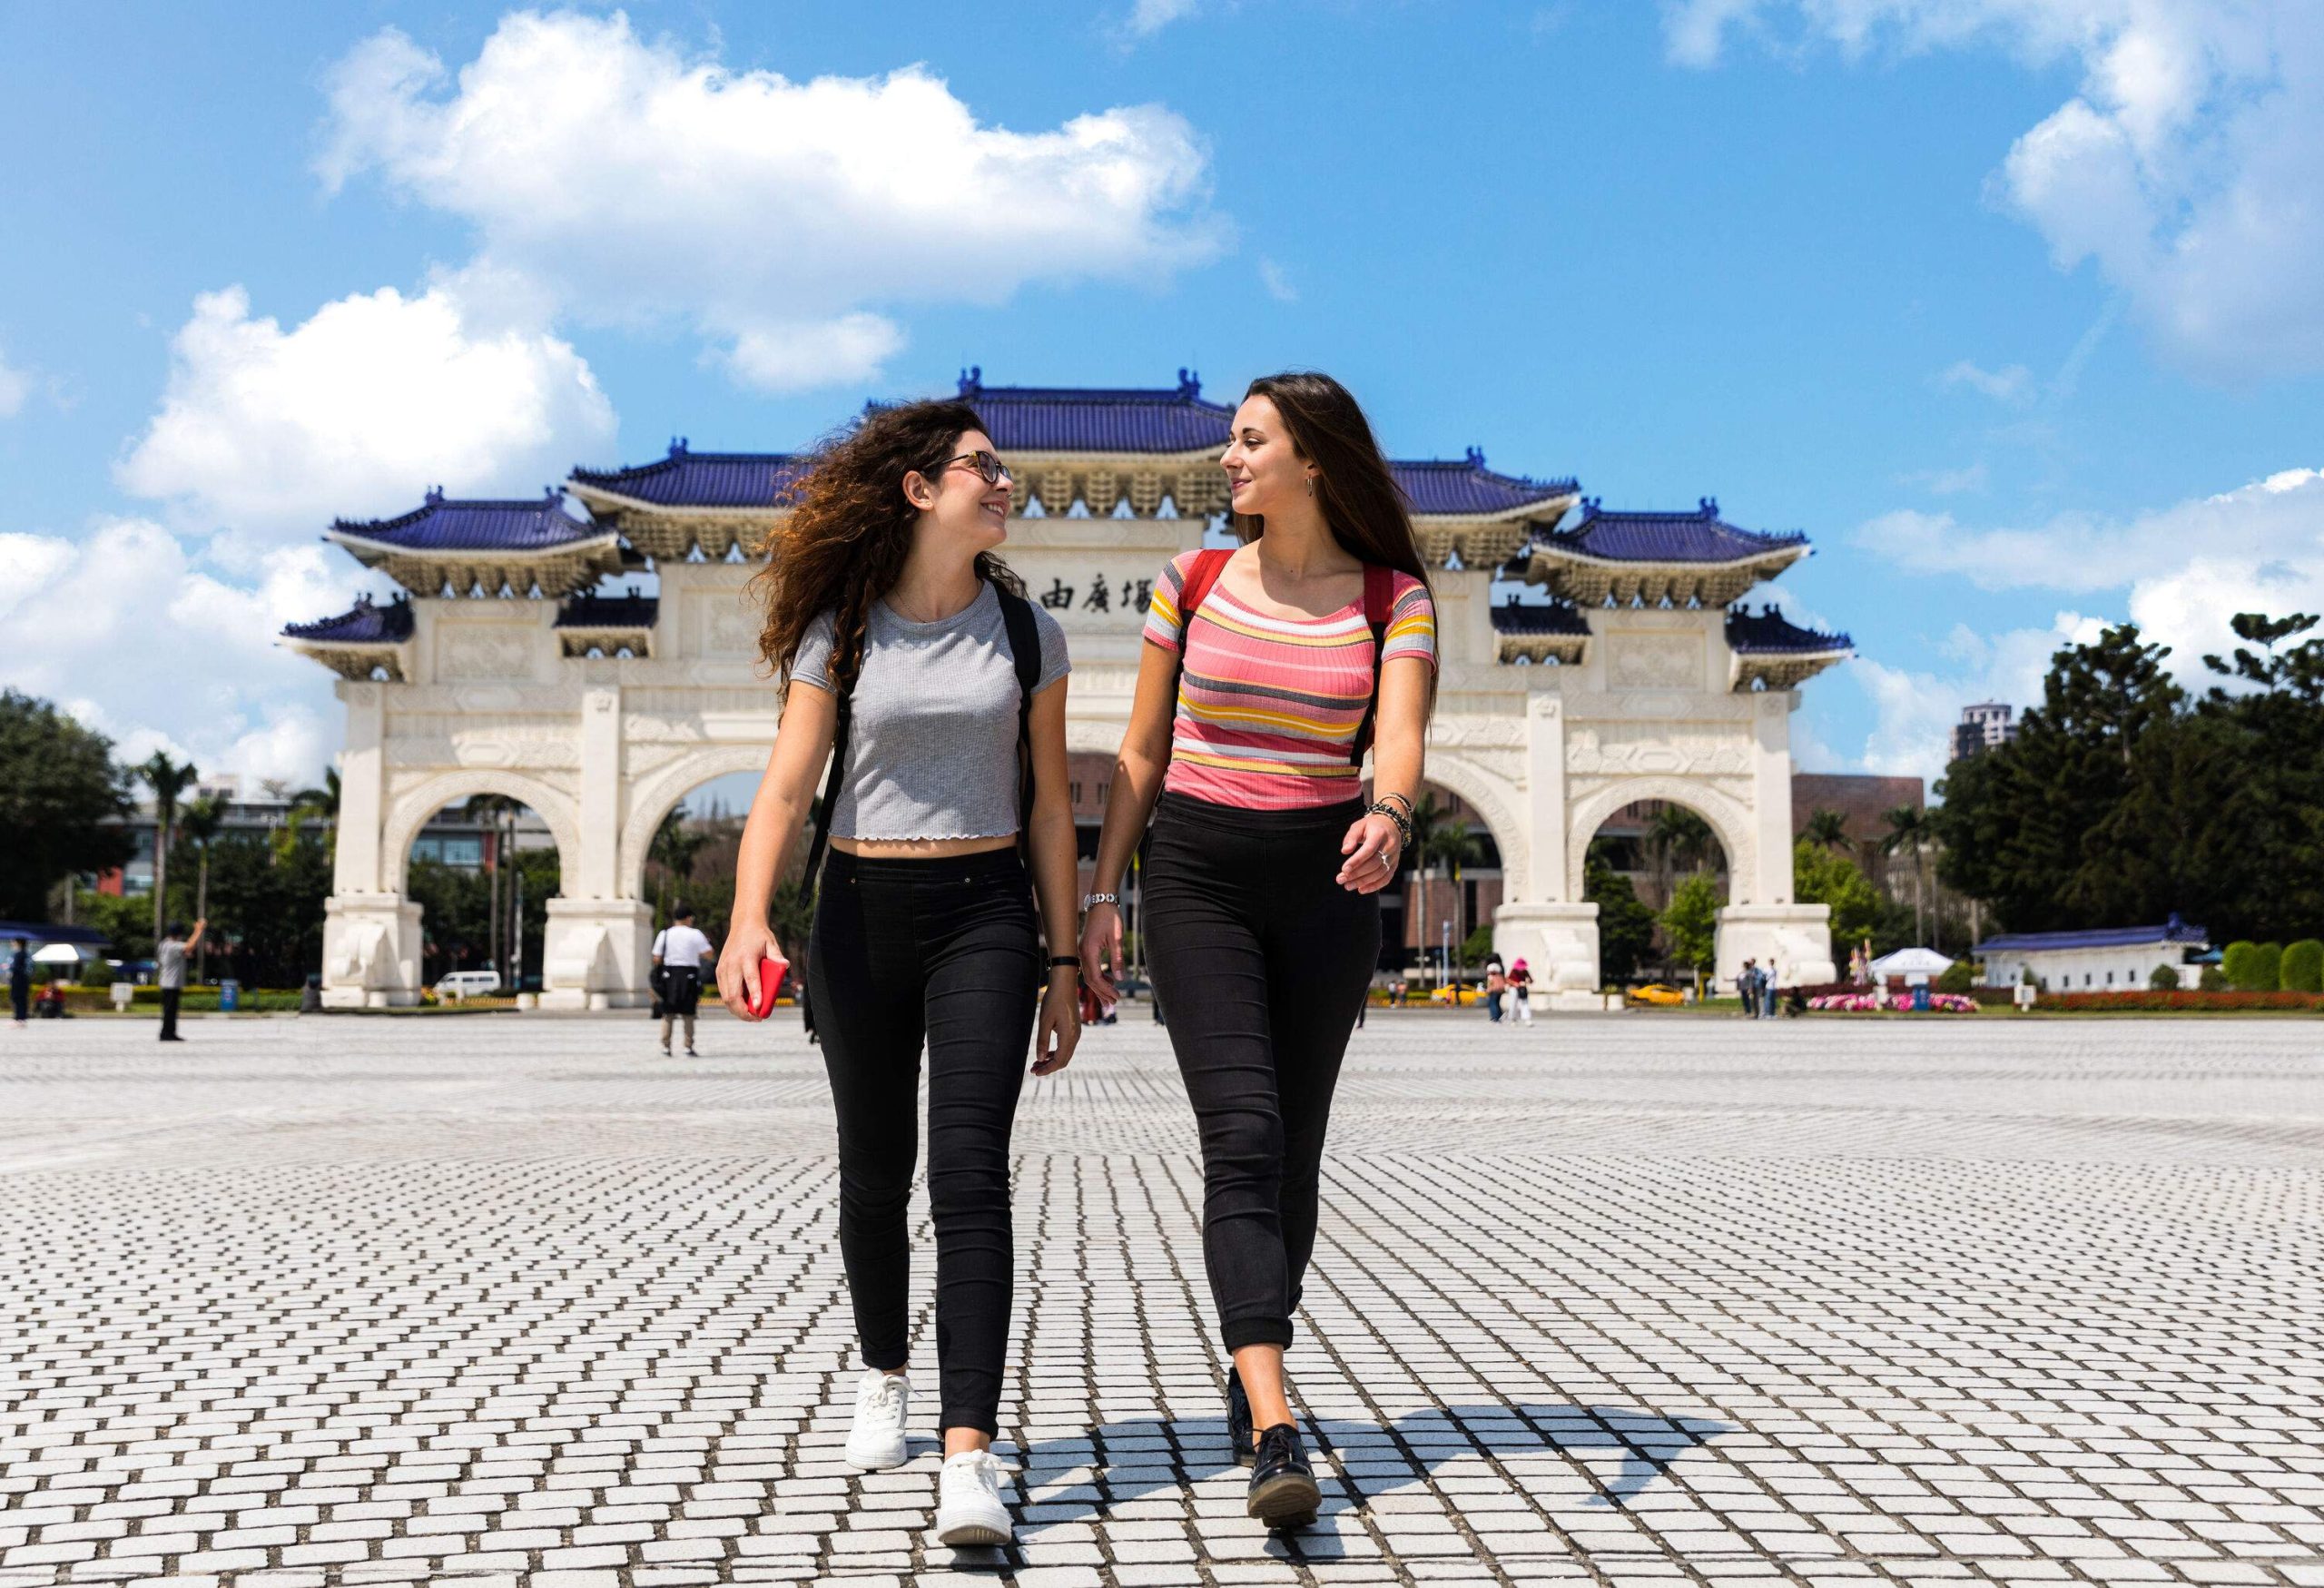 Two young women walking across a paved public plaza in front of a Chinese-style gateway structure.